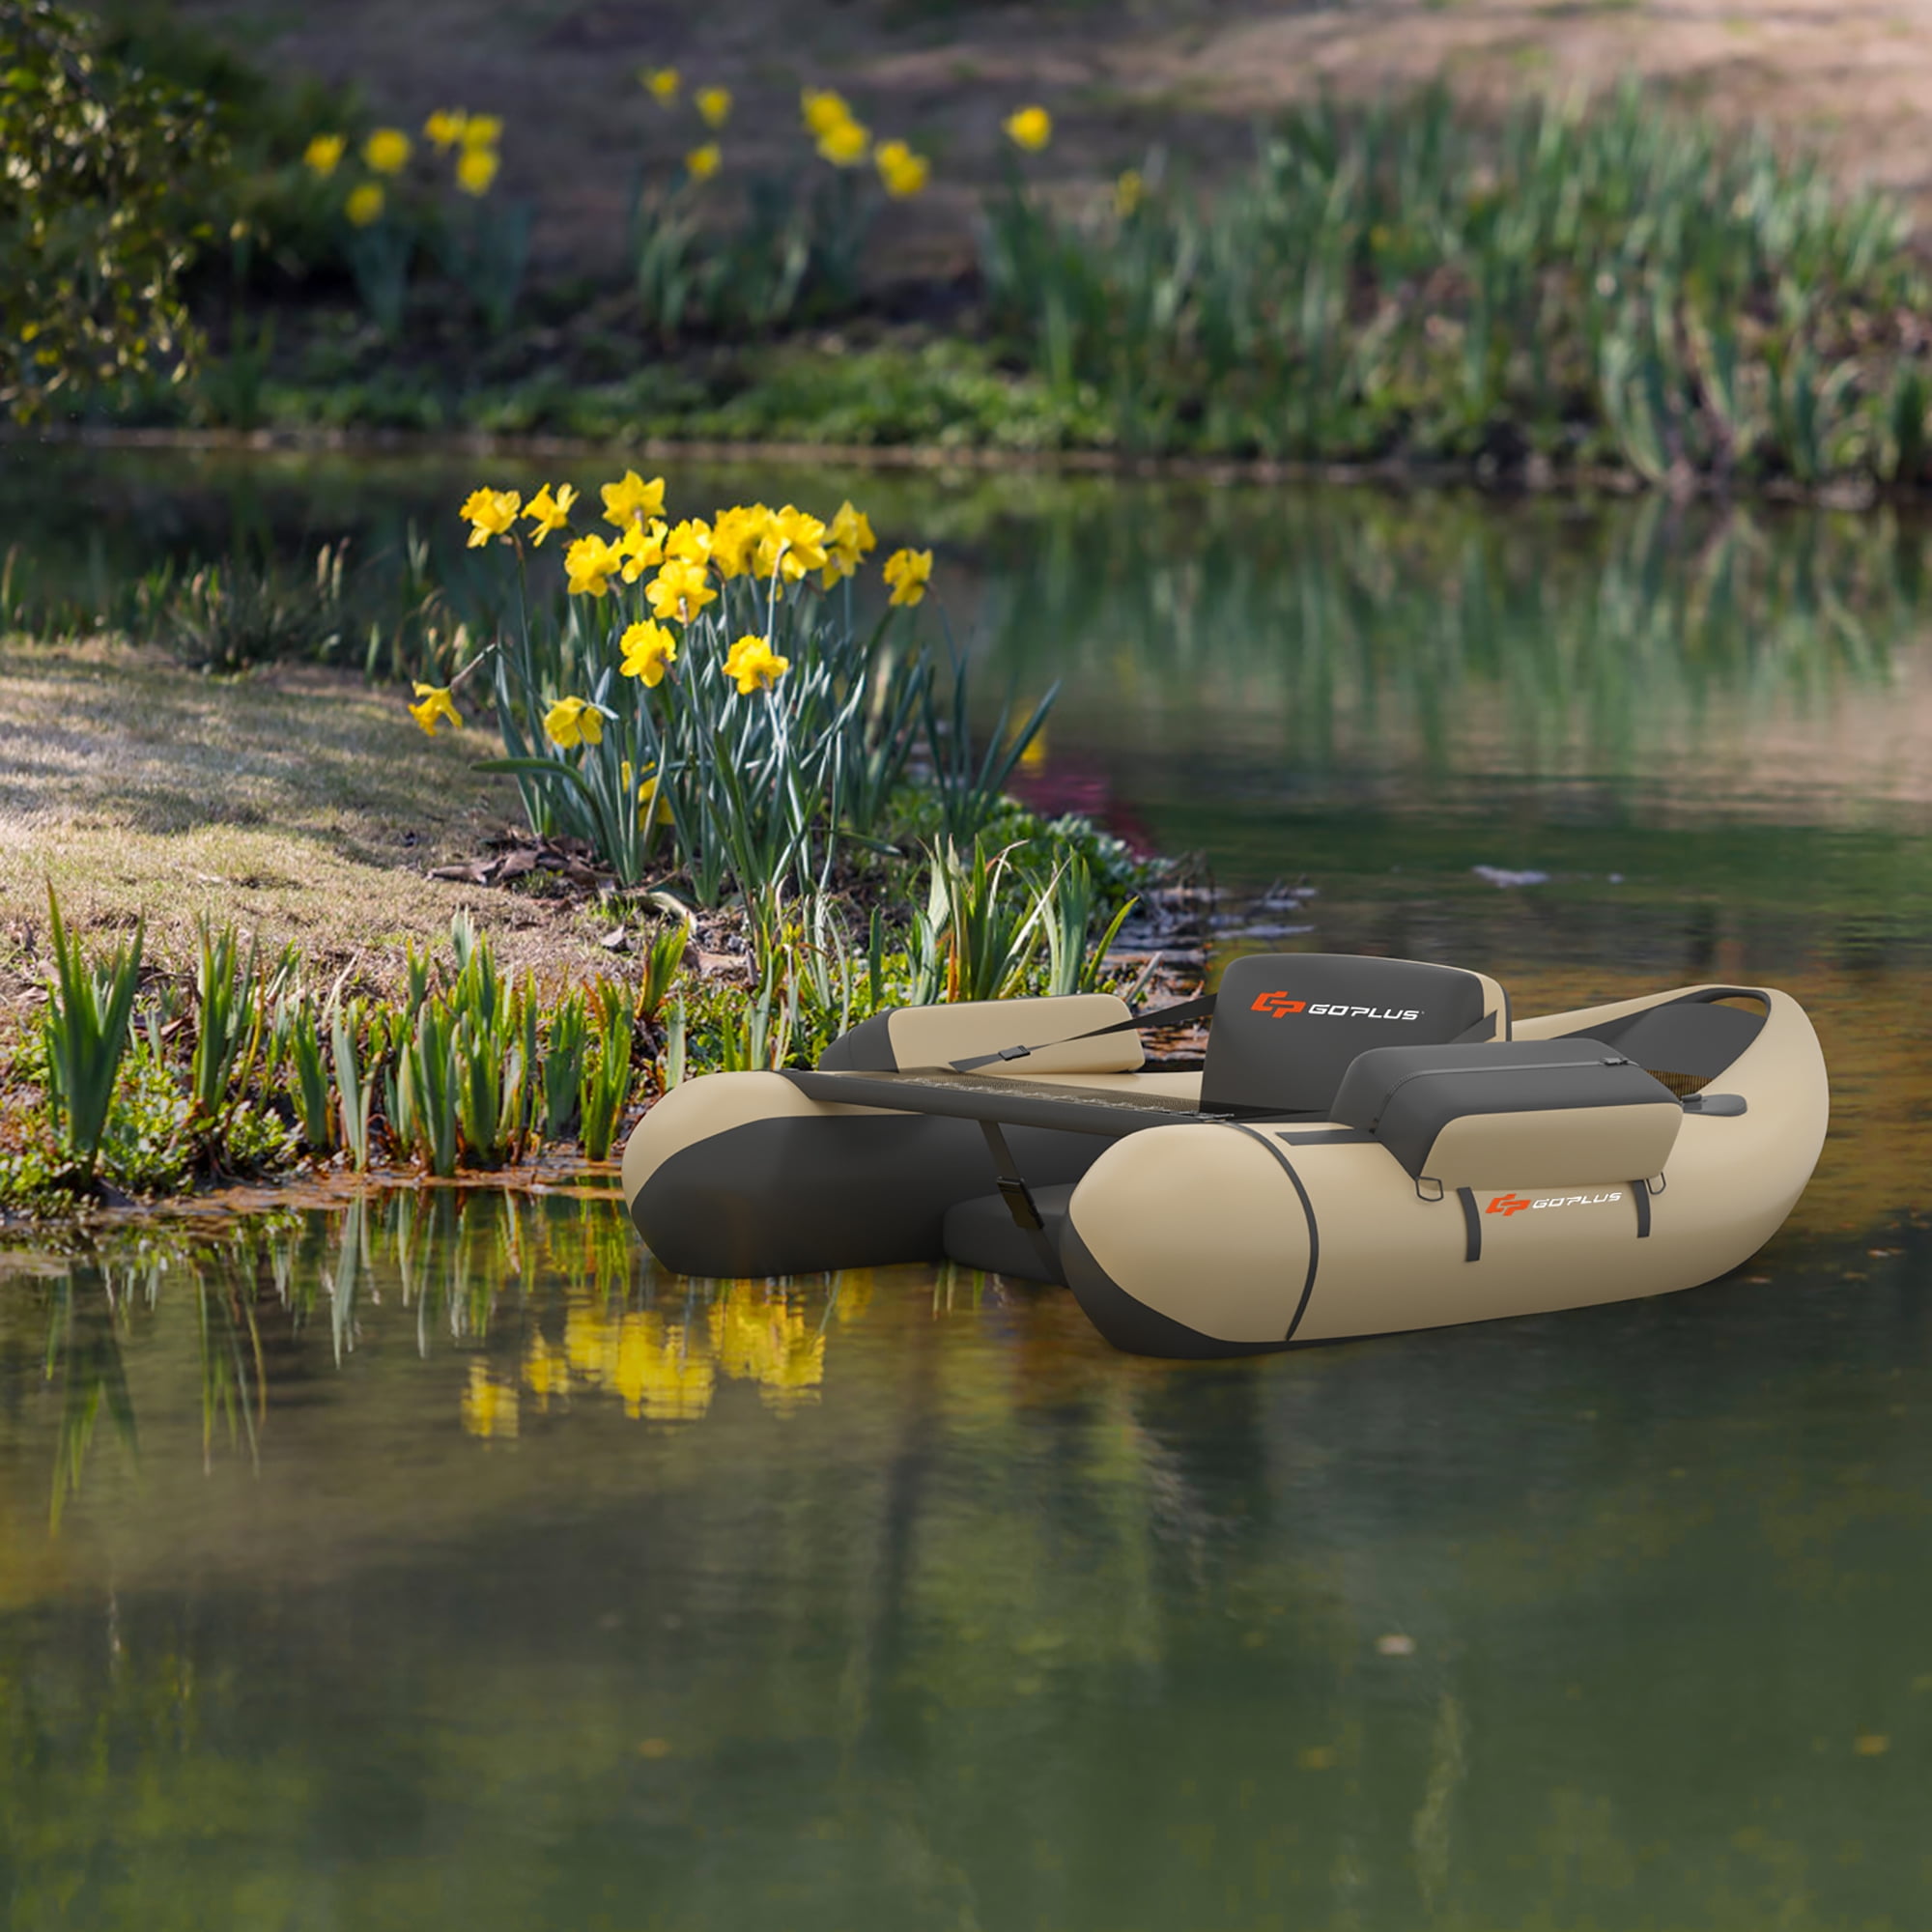 Details about   Goplus Inflatable Fishing Float Tube w/Storage Pockets & Fish Ruler & Pump Beige